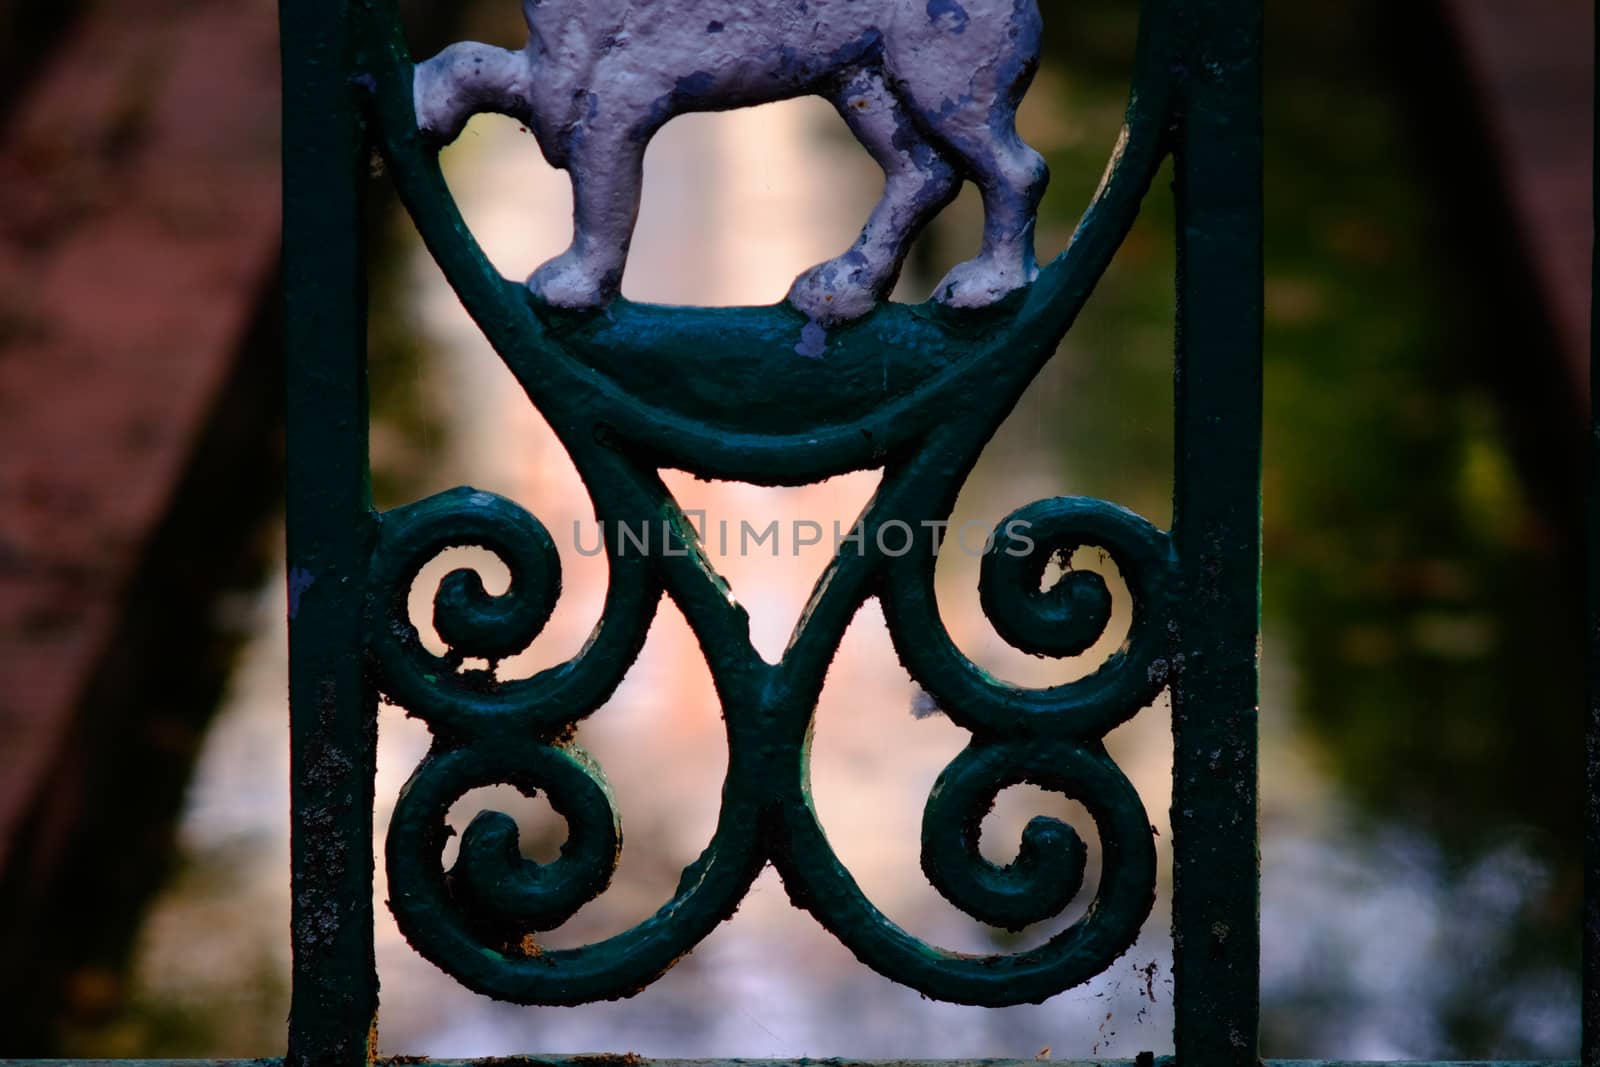 Typical lion metal figure from public fences in Pamplona, Spain by mikelju